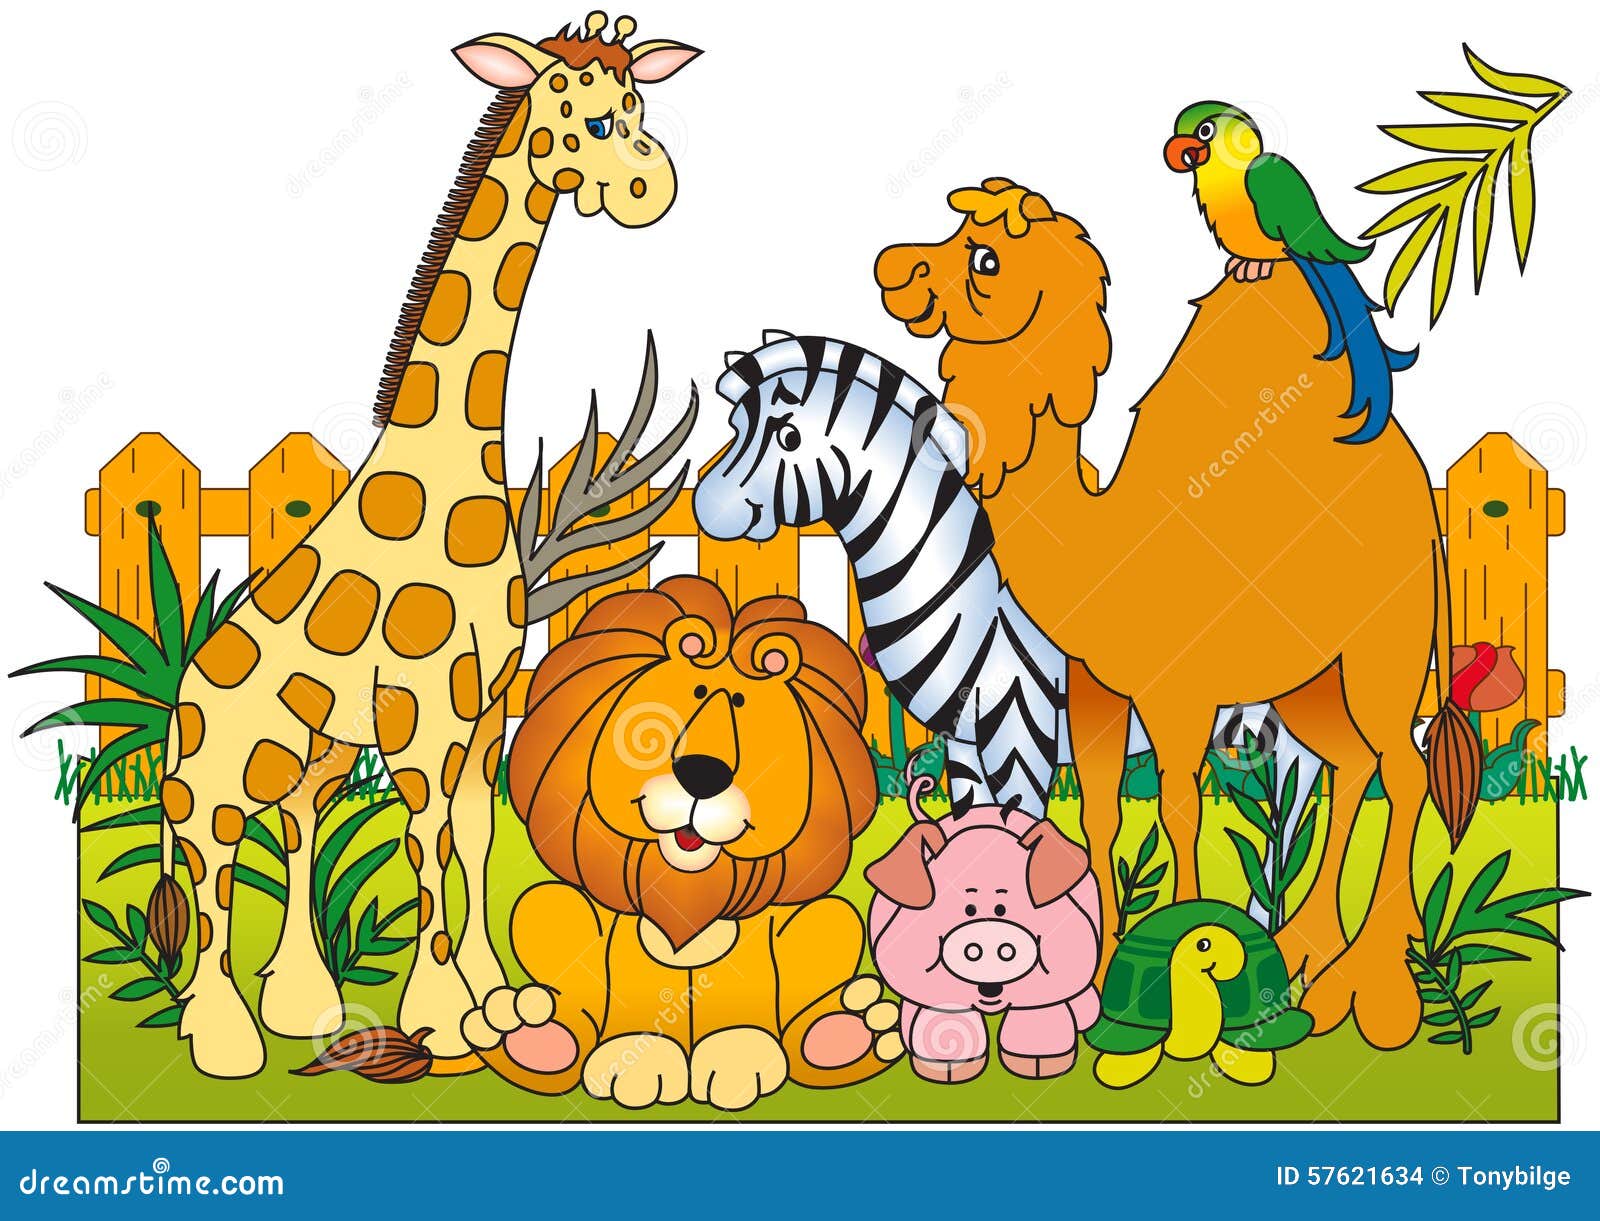 A group of wild animals stock vector. Illustration of cute ...